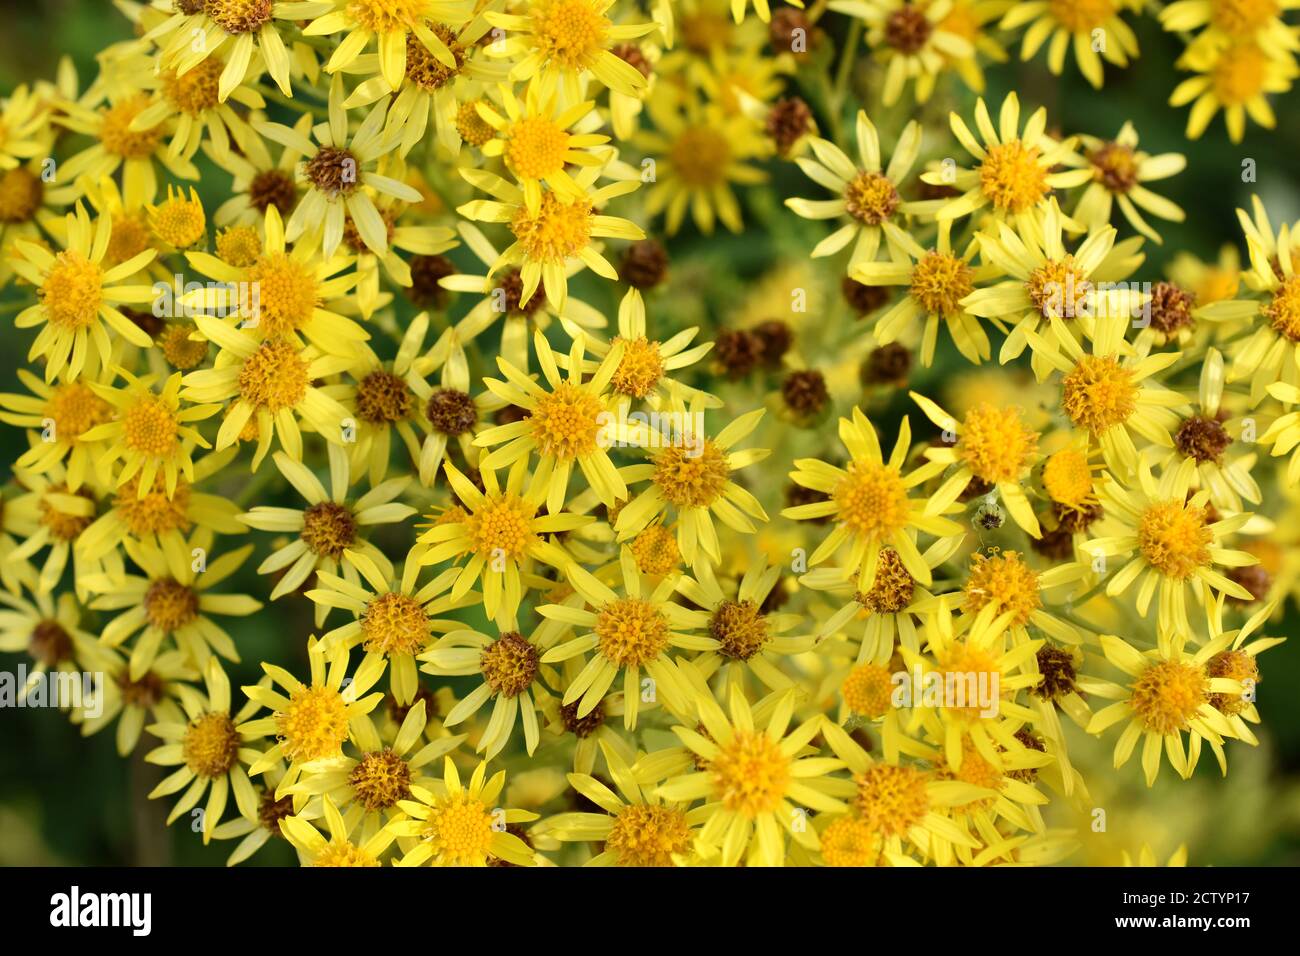 The poisonous invasive weed plant  ragwort flowering with yellow flowers Stock Photo